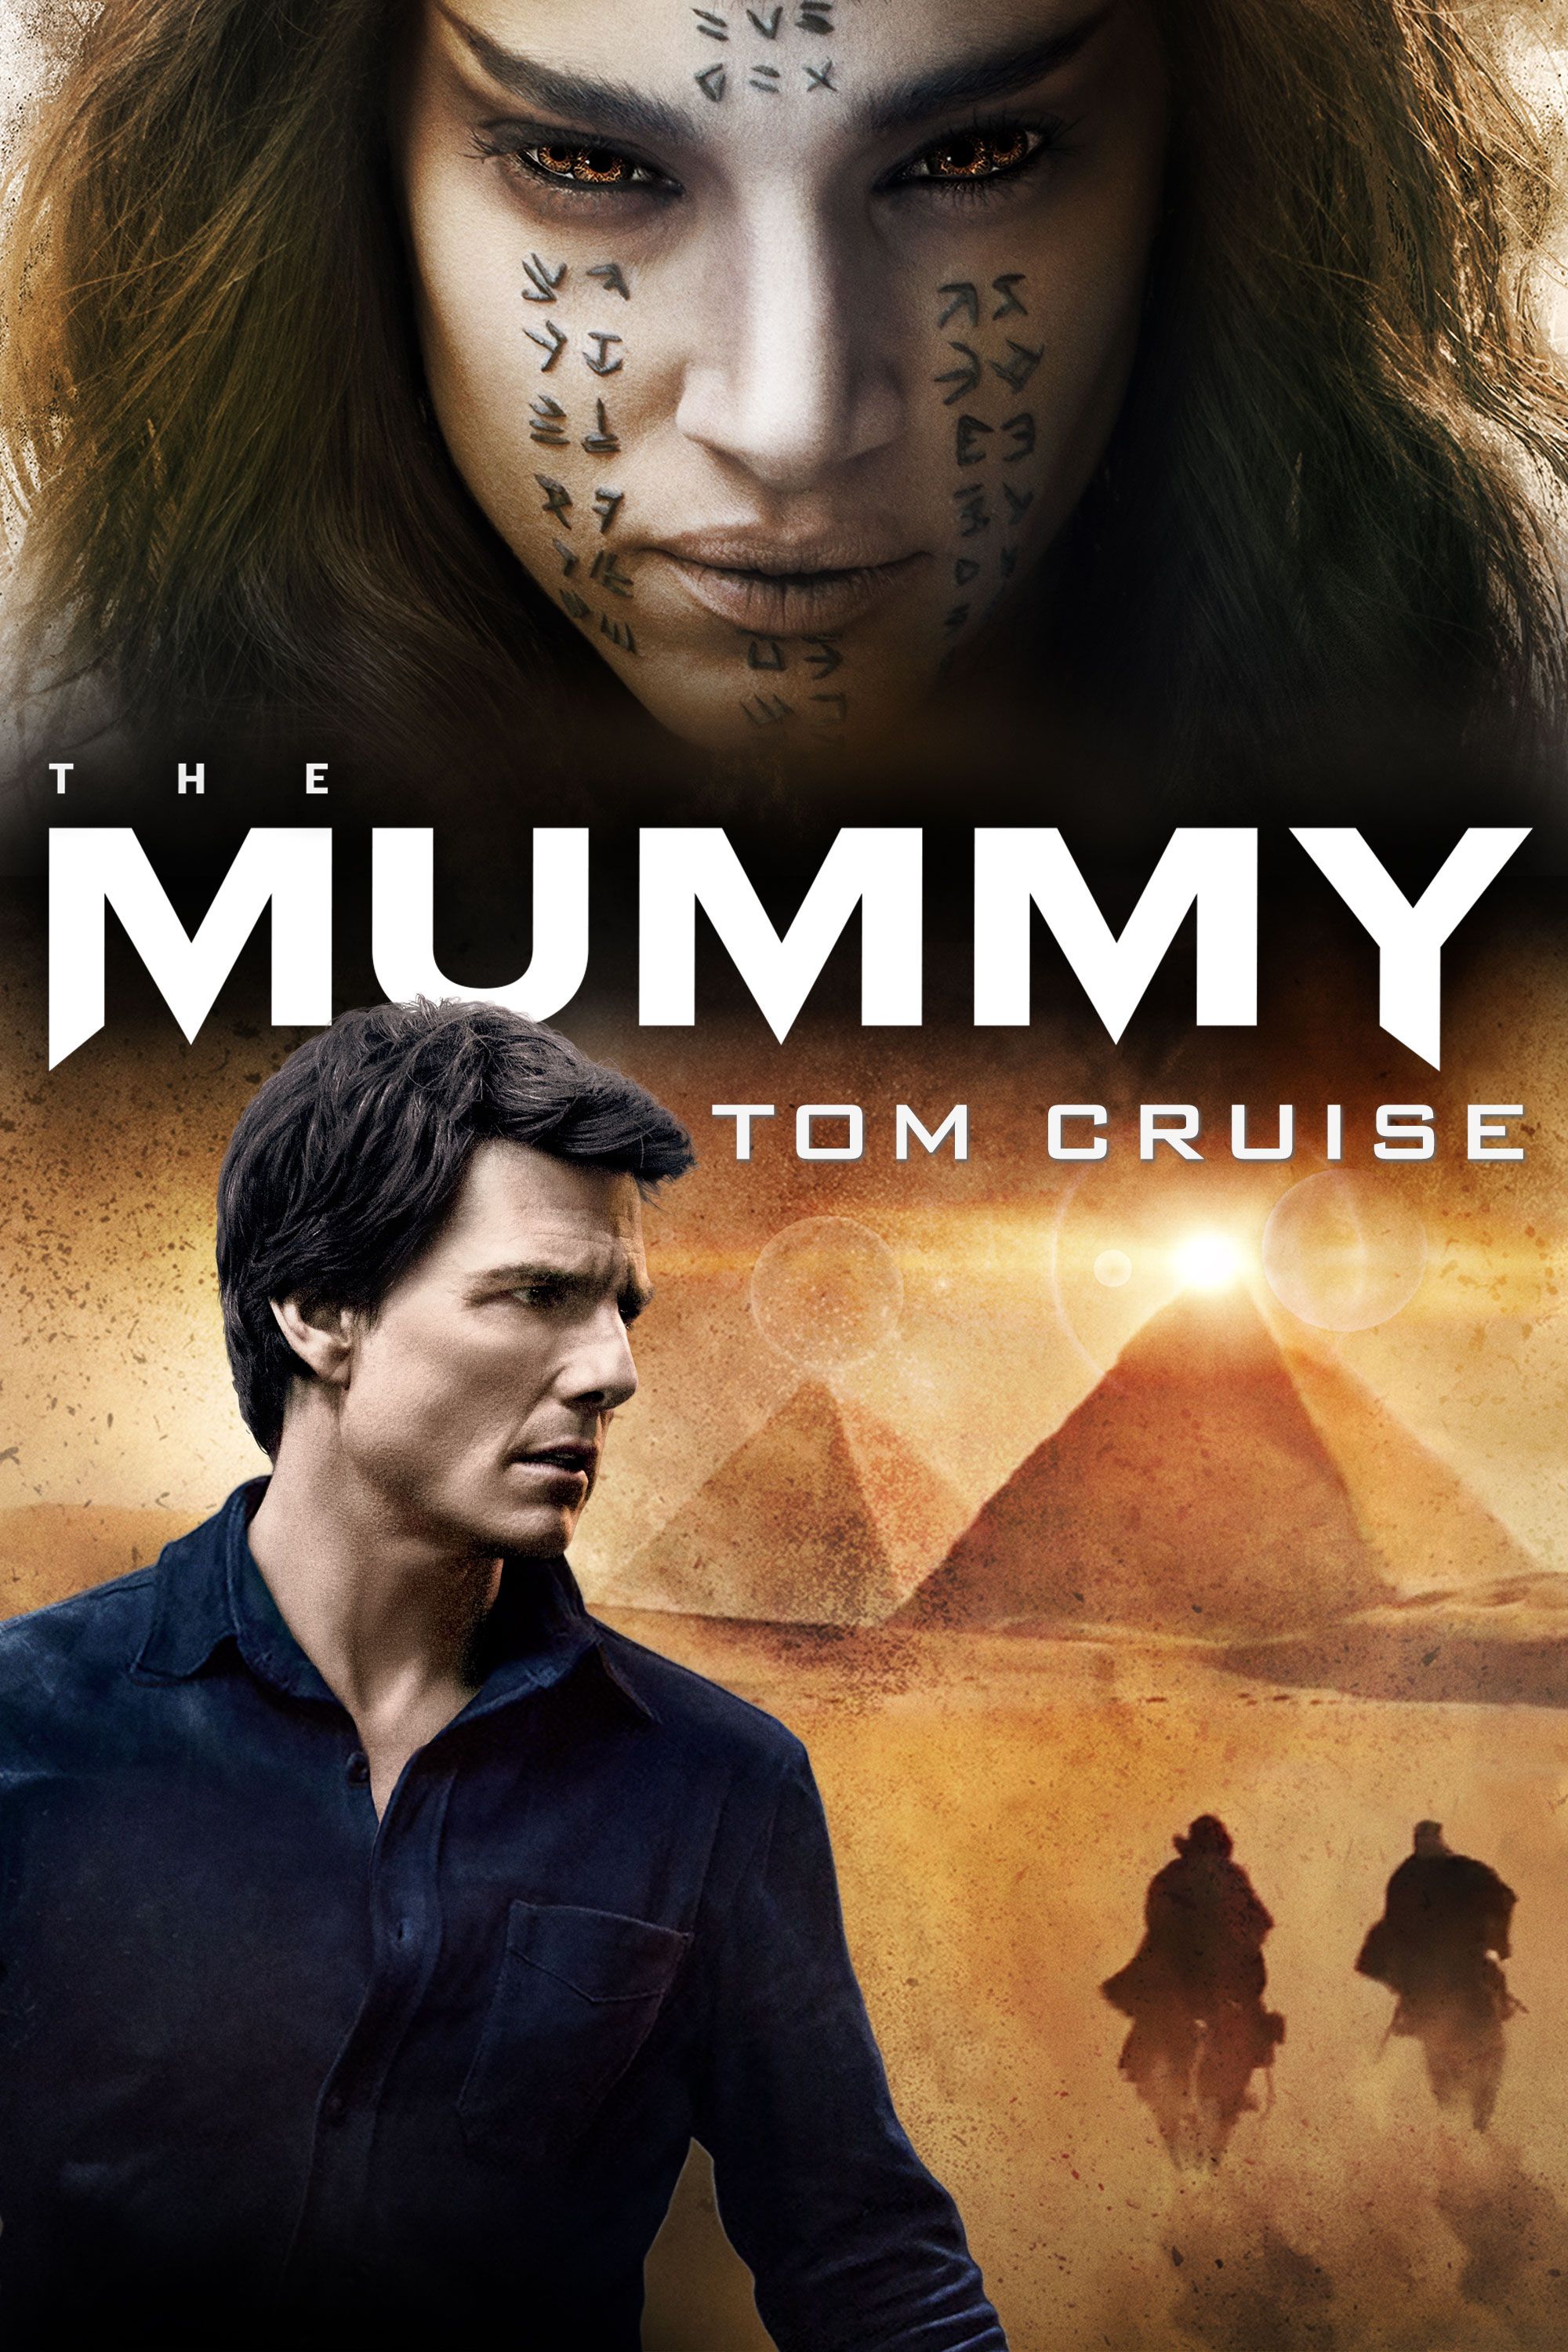 cj quay recommends The Mummy Full Movie Download